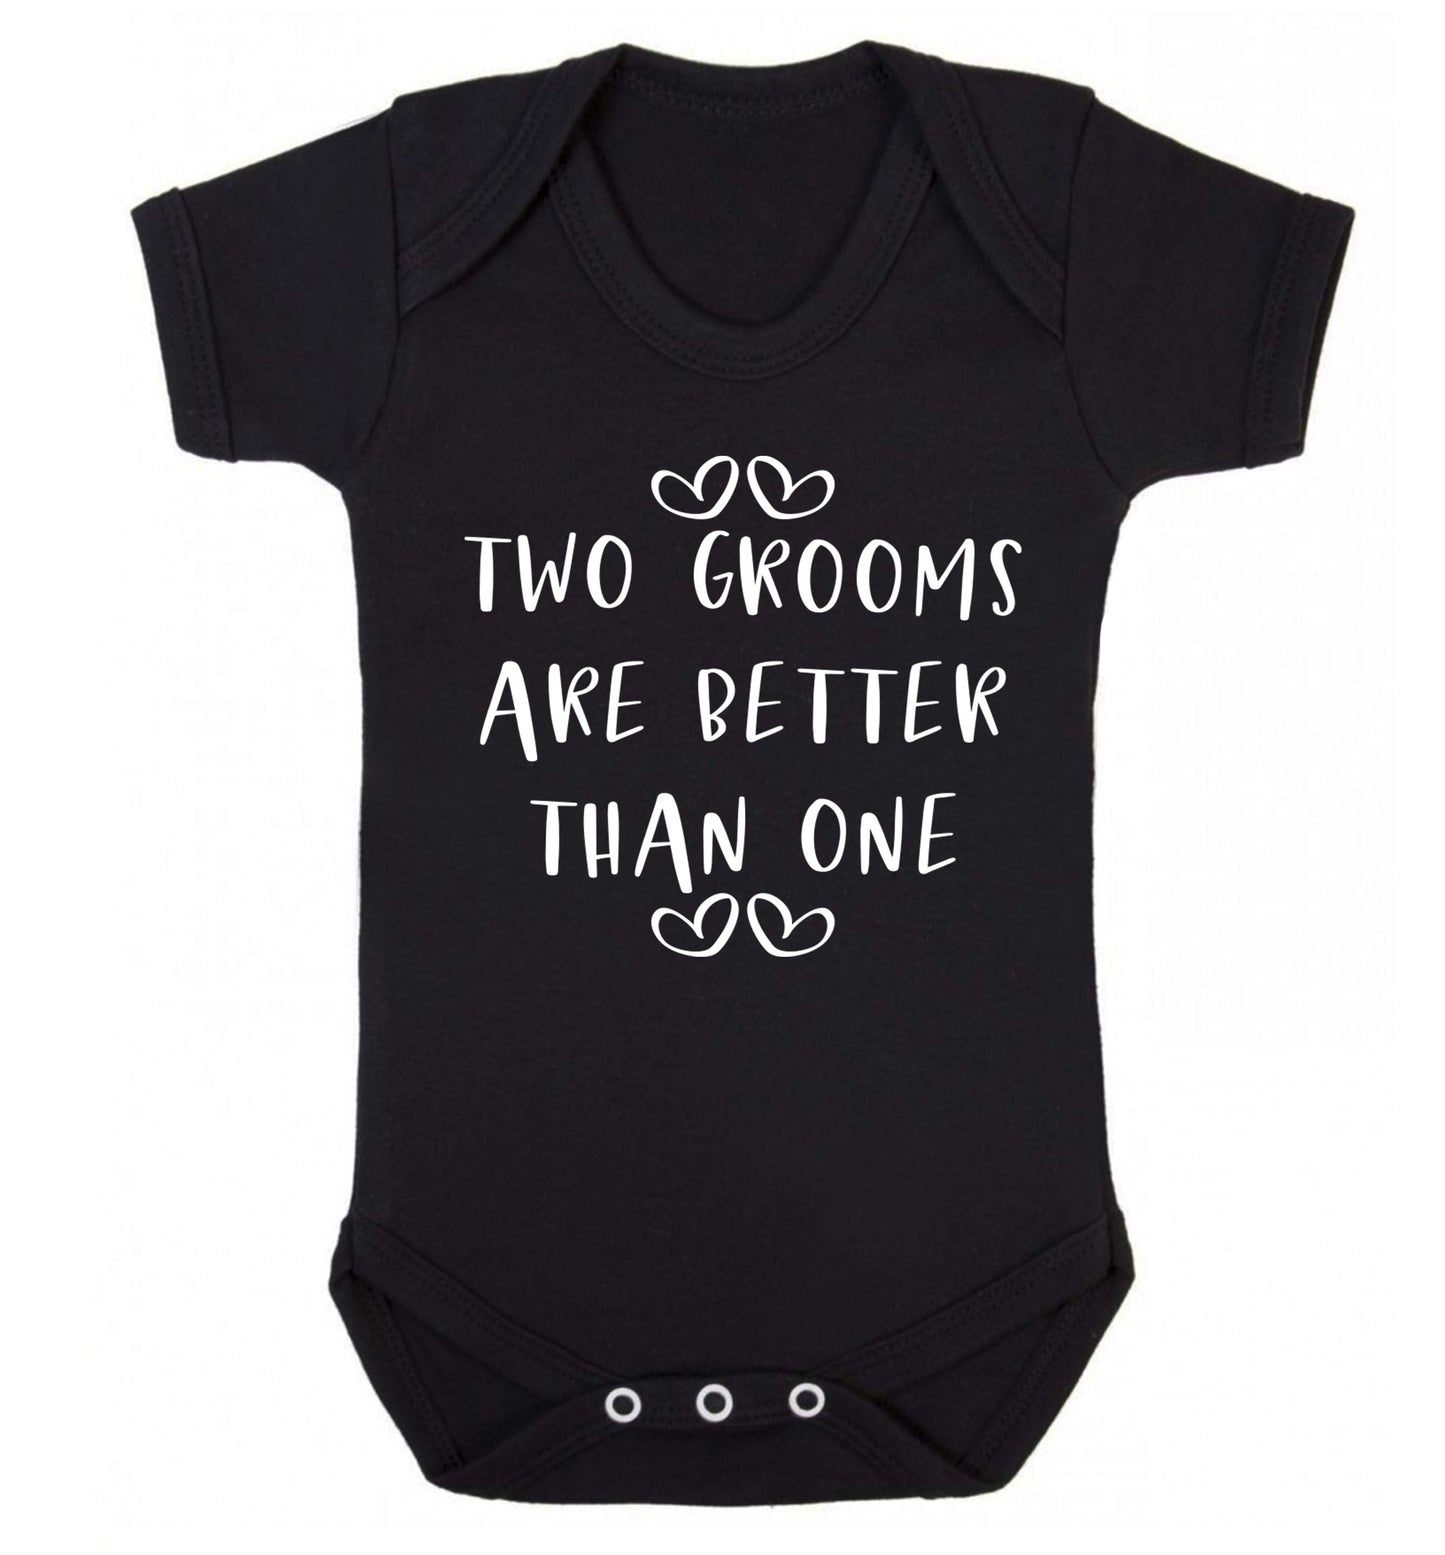 Two grooms are better than one baby vest black 18-24 months